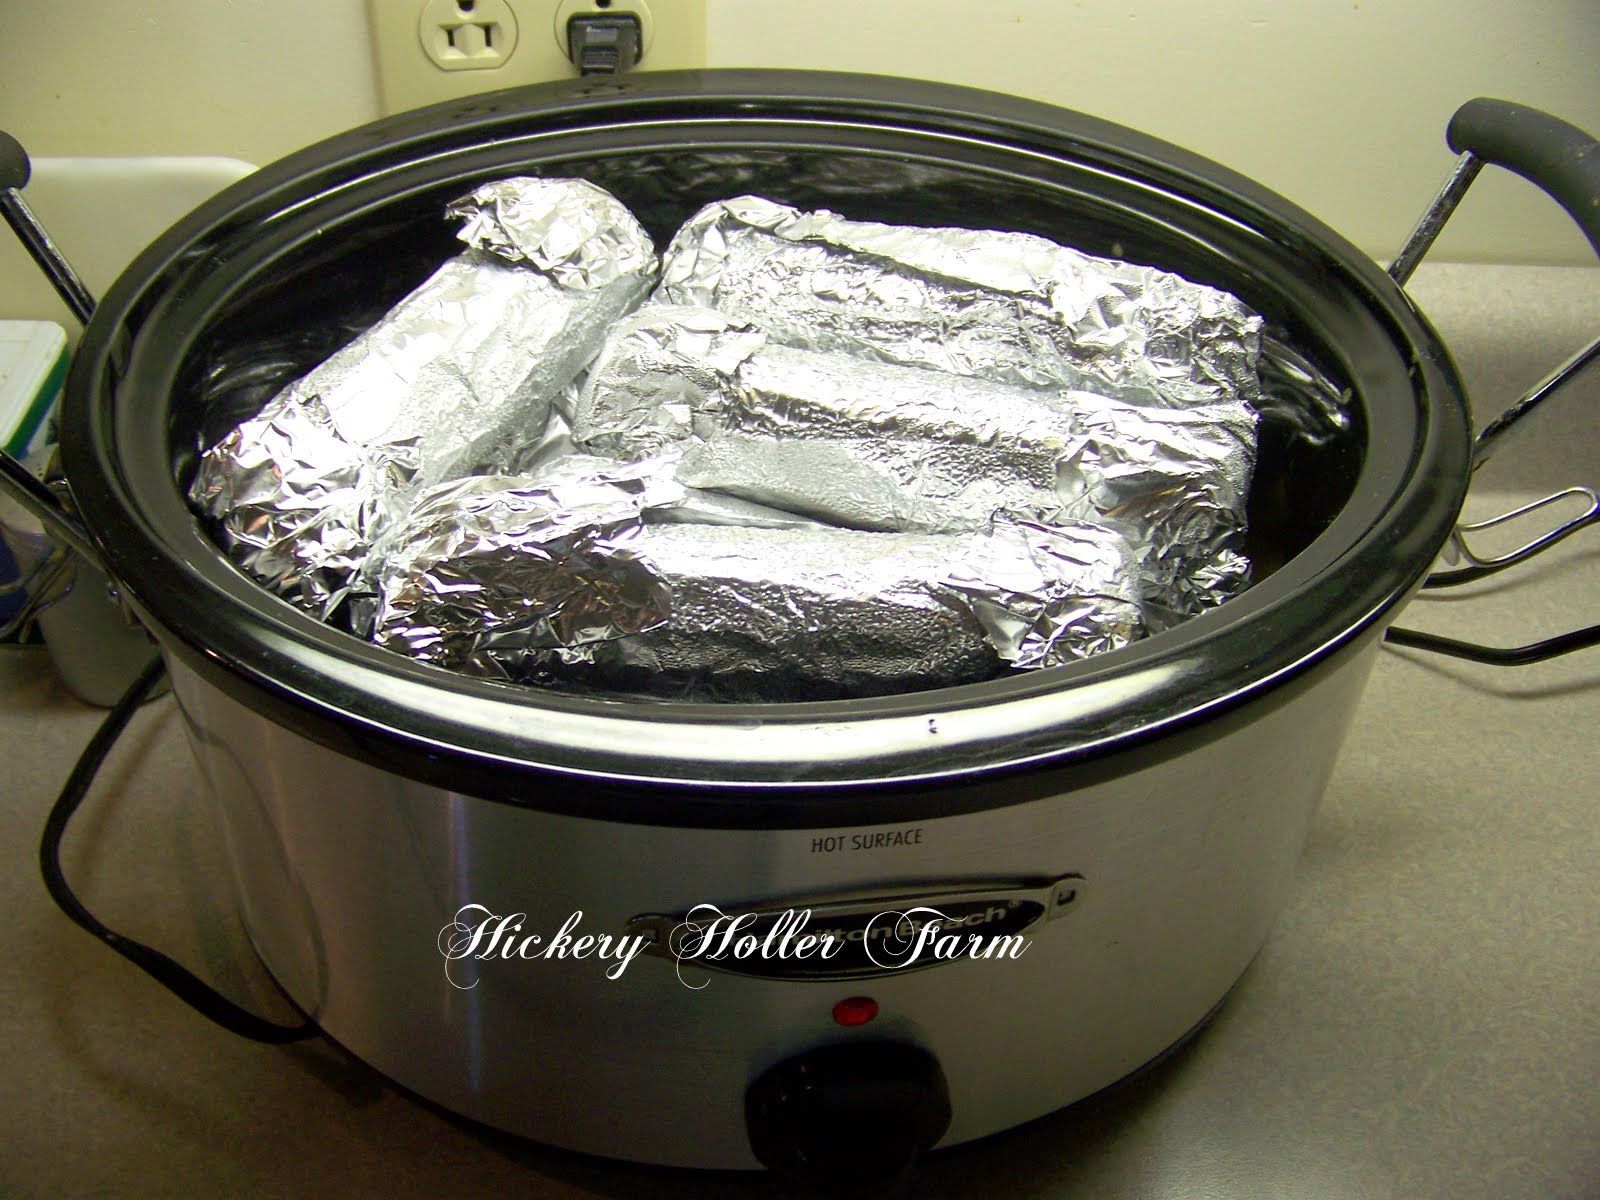 pork chops, baked potatoes and corn on the cob all in one crock pot for 6 hours